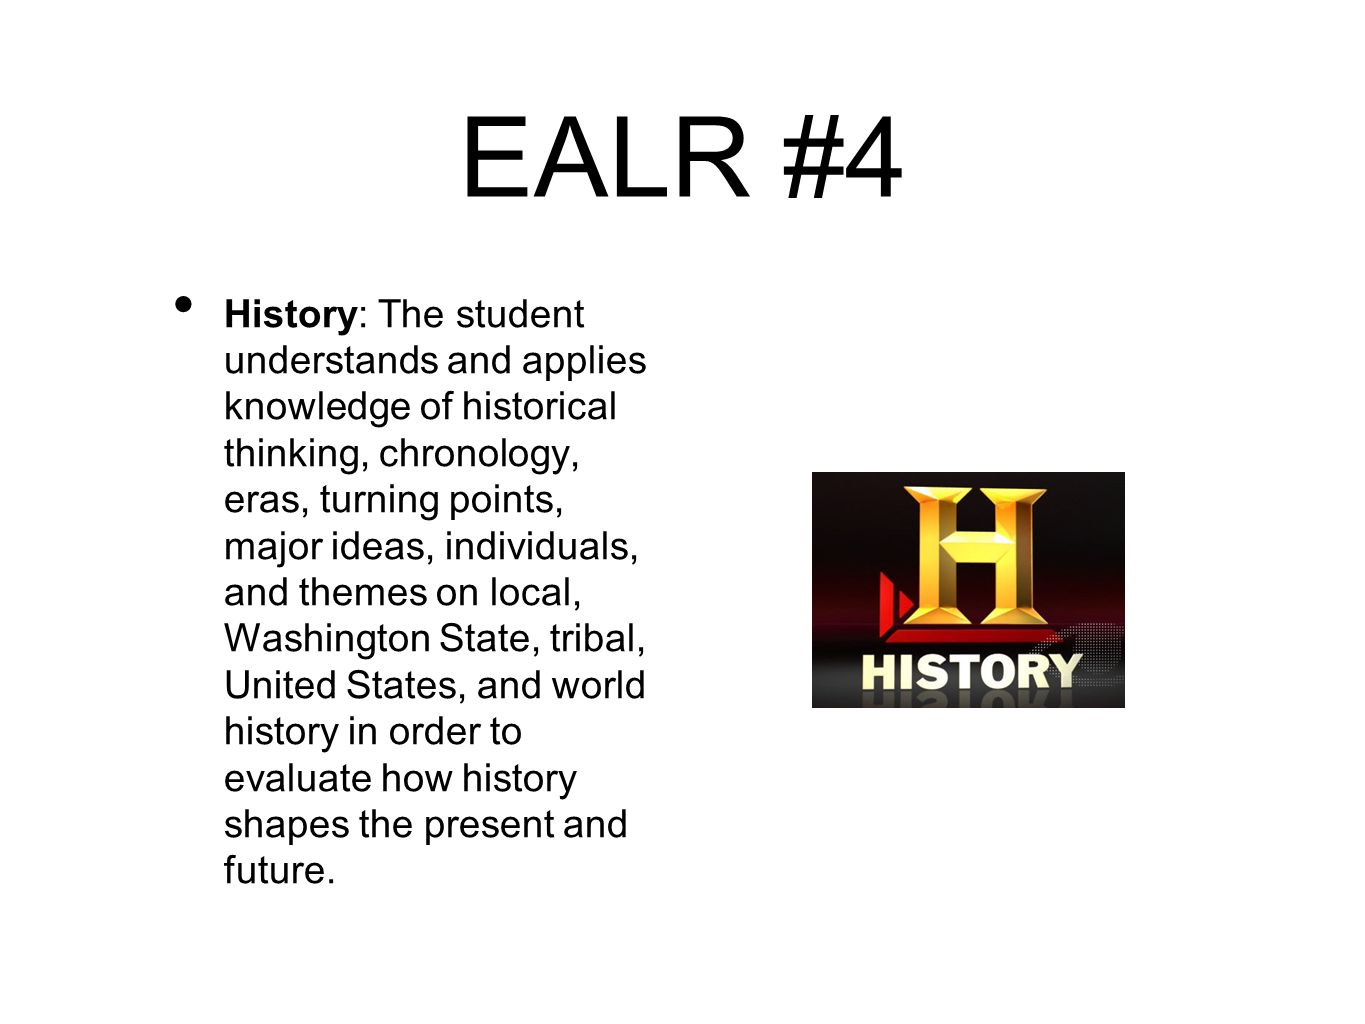 EALR #4 History: The student understands and applies knowledge of historical thinking, chronology, eras, turning points, major ideas, individuals, and themes on local, Washington State, tribal, United States, and world history in order to evaluate how history shapes the present and future.